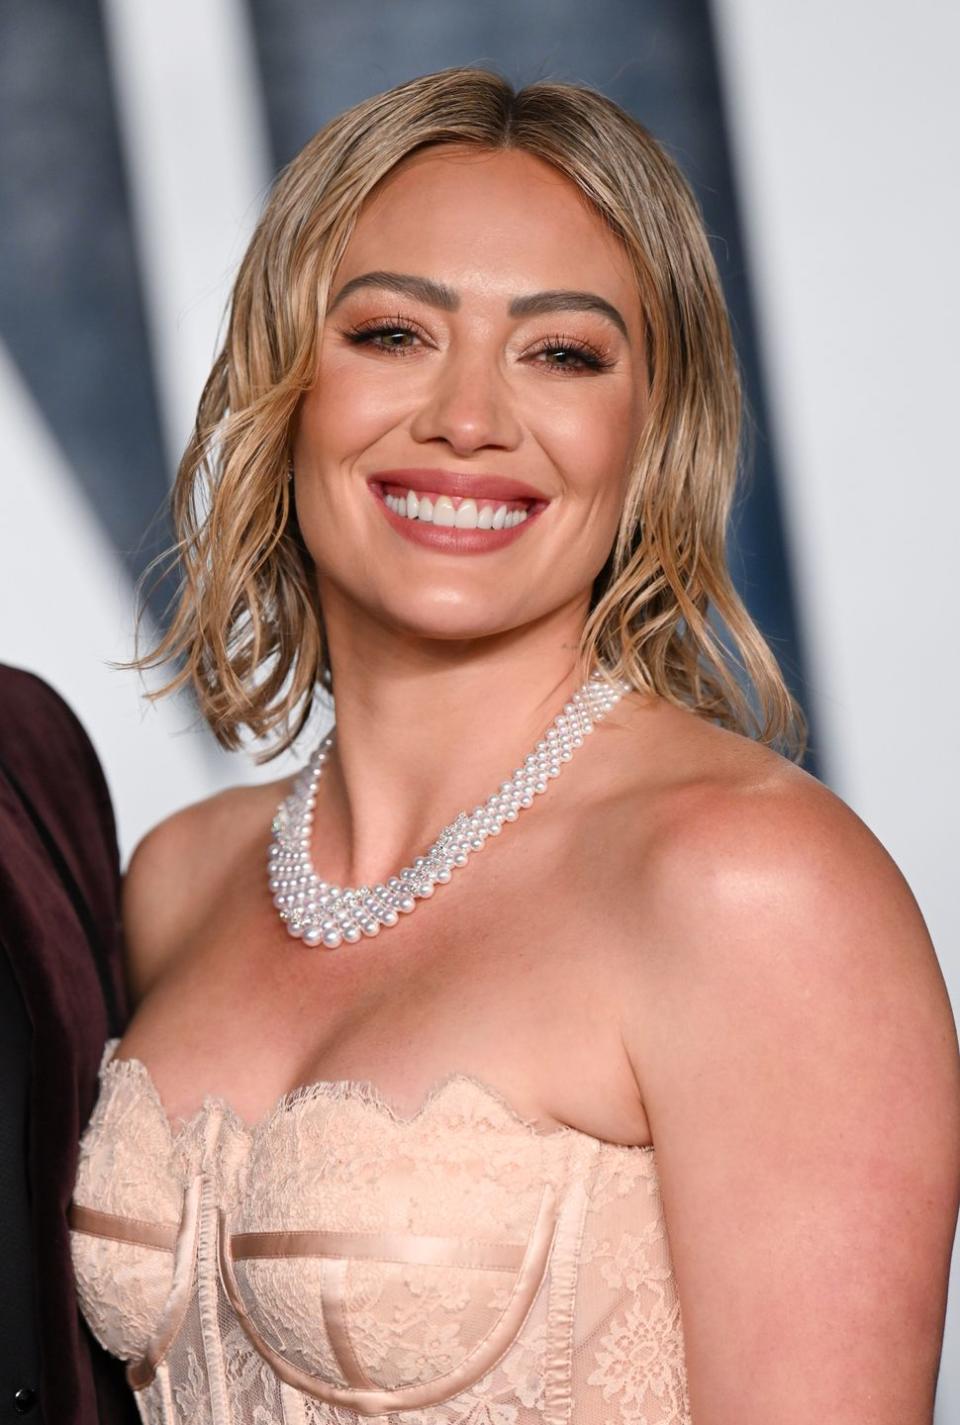 beverly hills, california march 12 hilary duff attends the 2023 vanity fair oscar party hosted by radhika jones at wallis annenberg center for the performing arts on march 12, 2023 in beverly hills, california photo by karwai tangwireimage